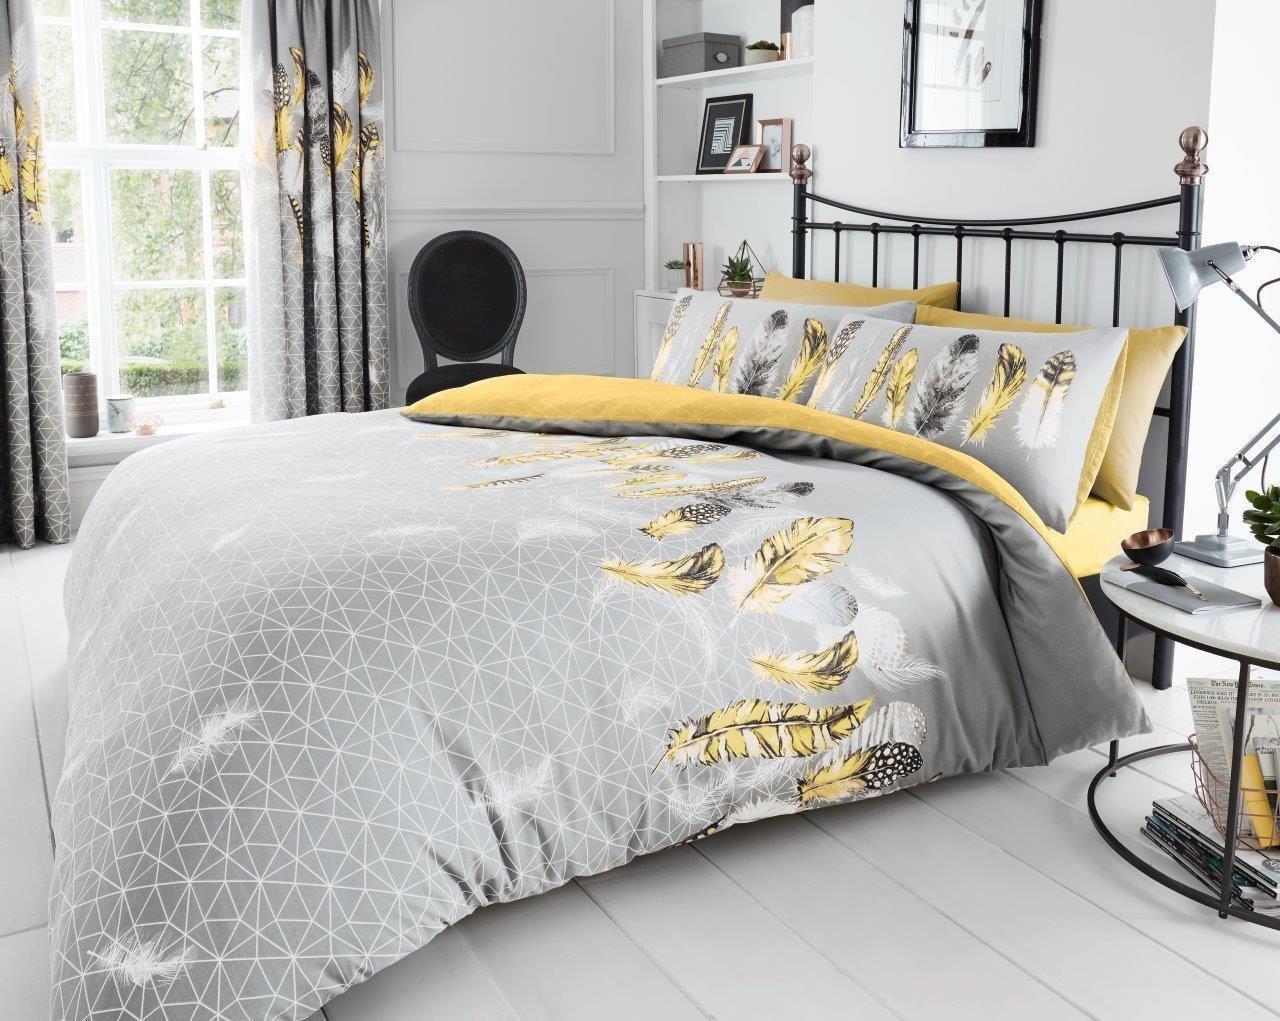 Printed Polycotton Feathers Duvet Cover With Pillowcases